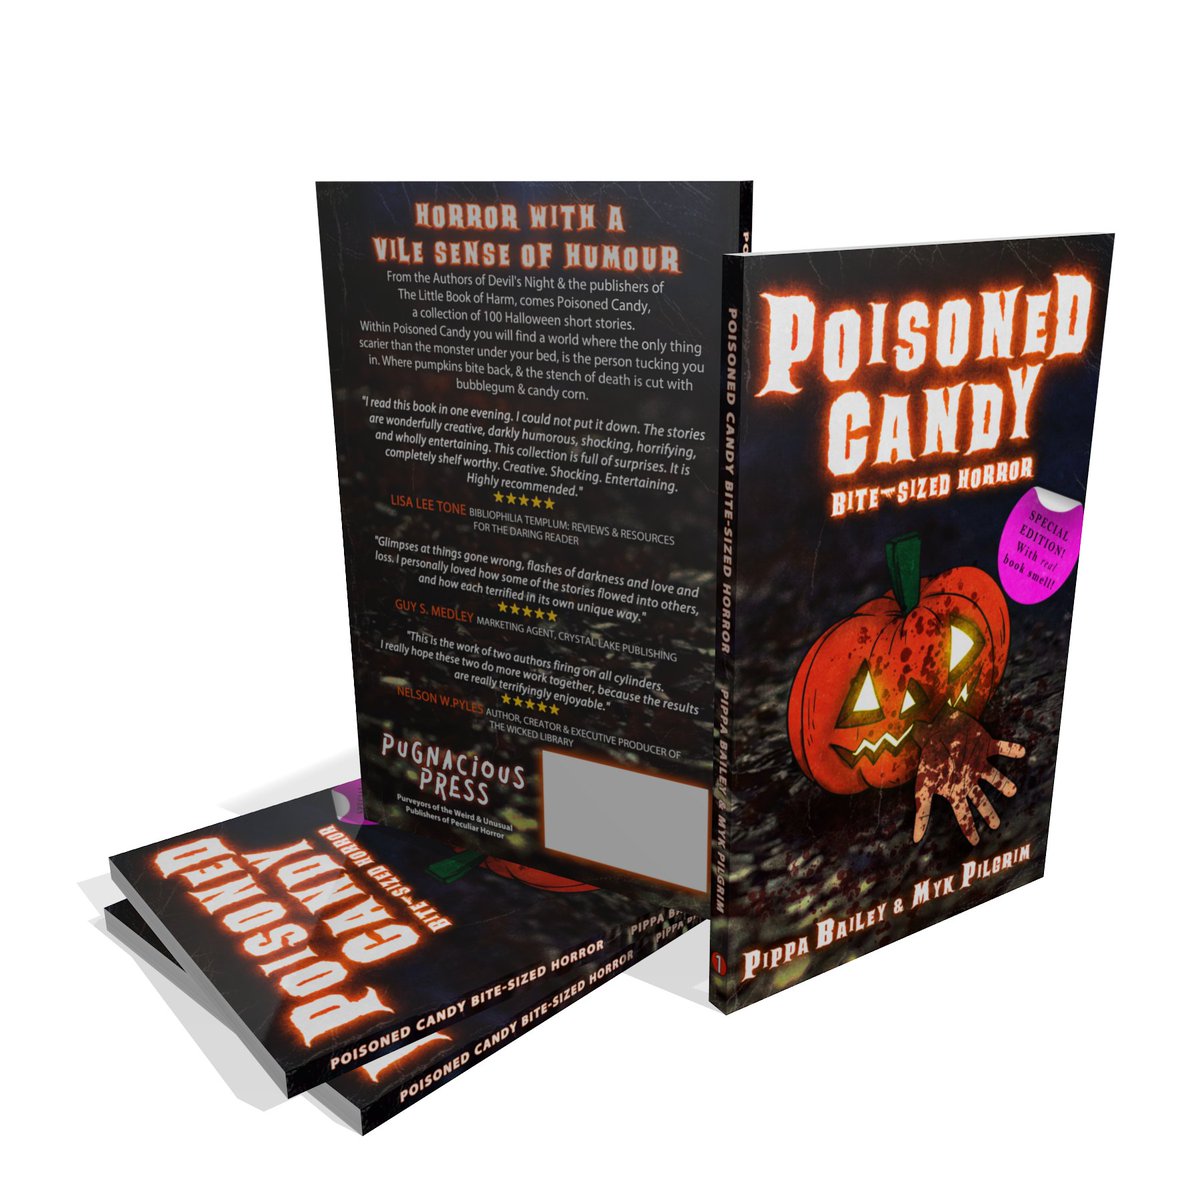 Poisoned Candy E-book available for $.99 until June 30th, grab yourself a copy now! 100, 100-word horror stories from Myk Pilgrim and Pippa Bailey, 

 #cheapbook #99pbook 

Amazon UK: amzn.to/2EsDPzU
Amazon US: bit.ly/CandyAzUS
📙 ibooks: books2read.com/PoisonedCandy